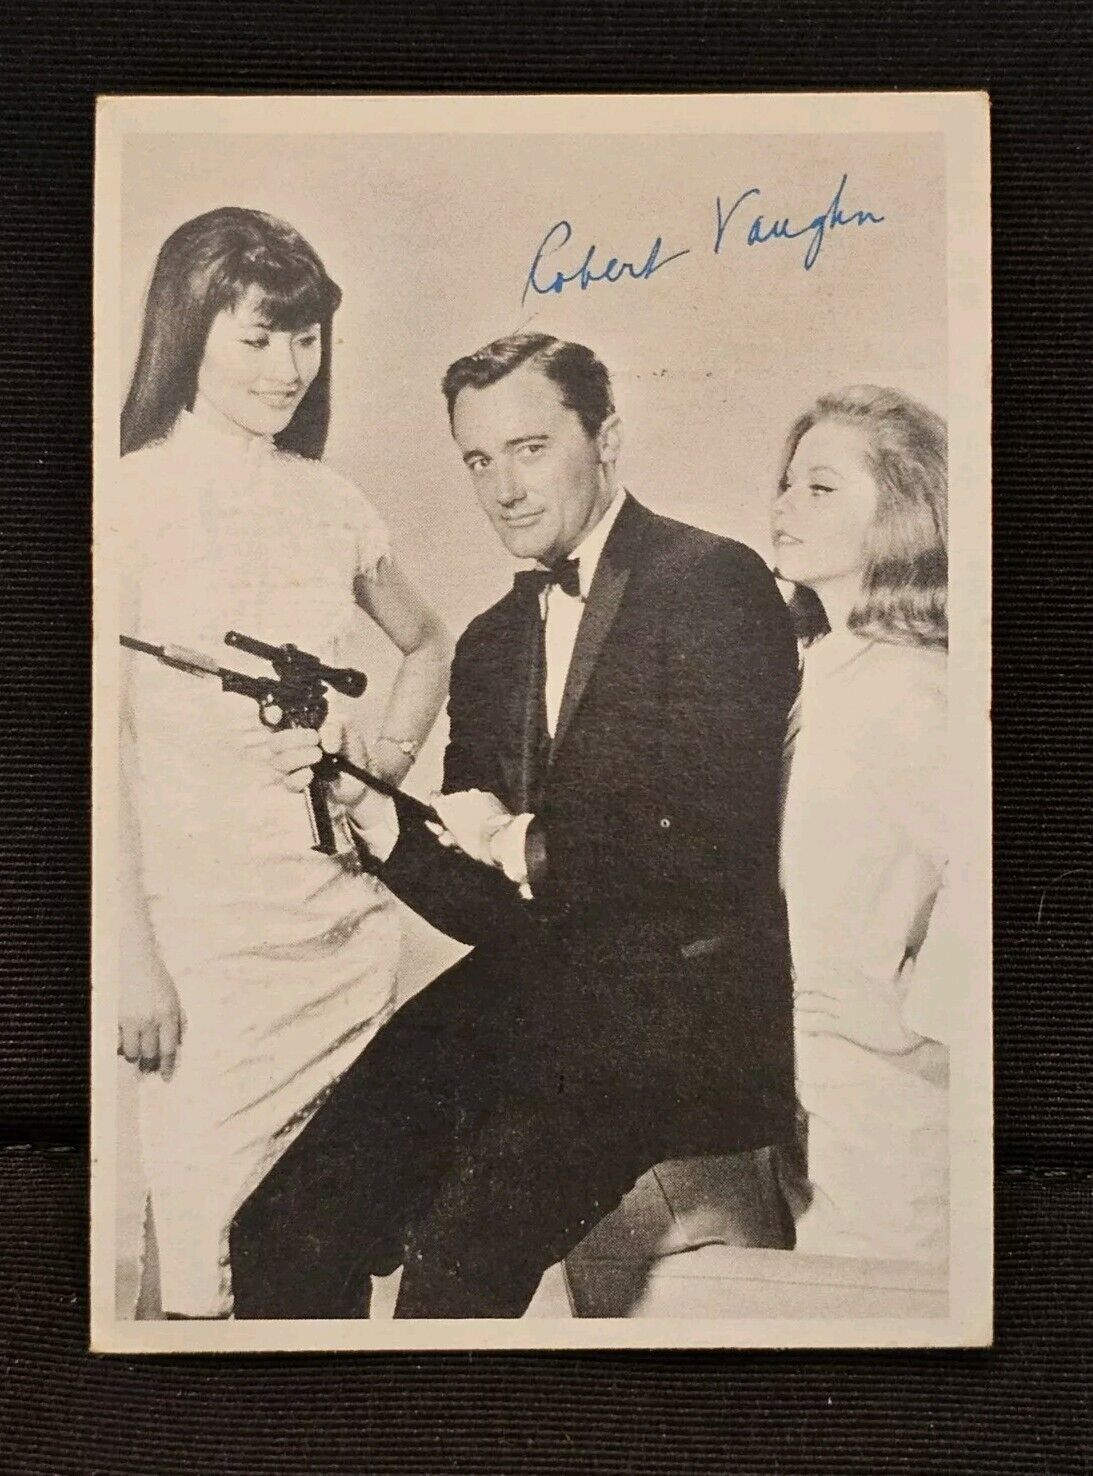 1965 The Man from U.N.C.L.E. #46 Robert Vaughn as Napoleon Solo by Topps